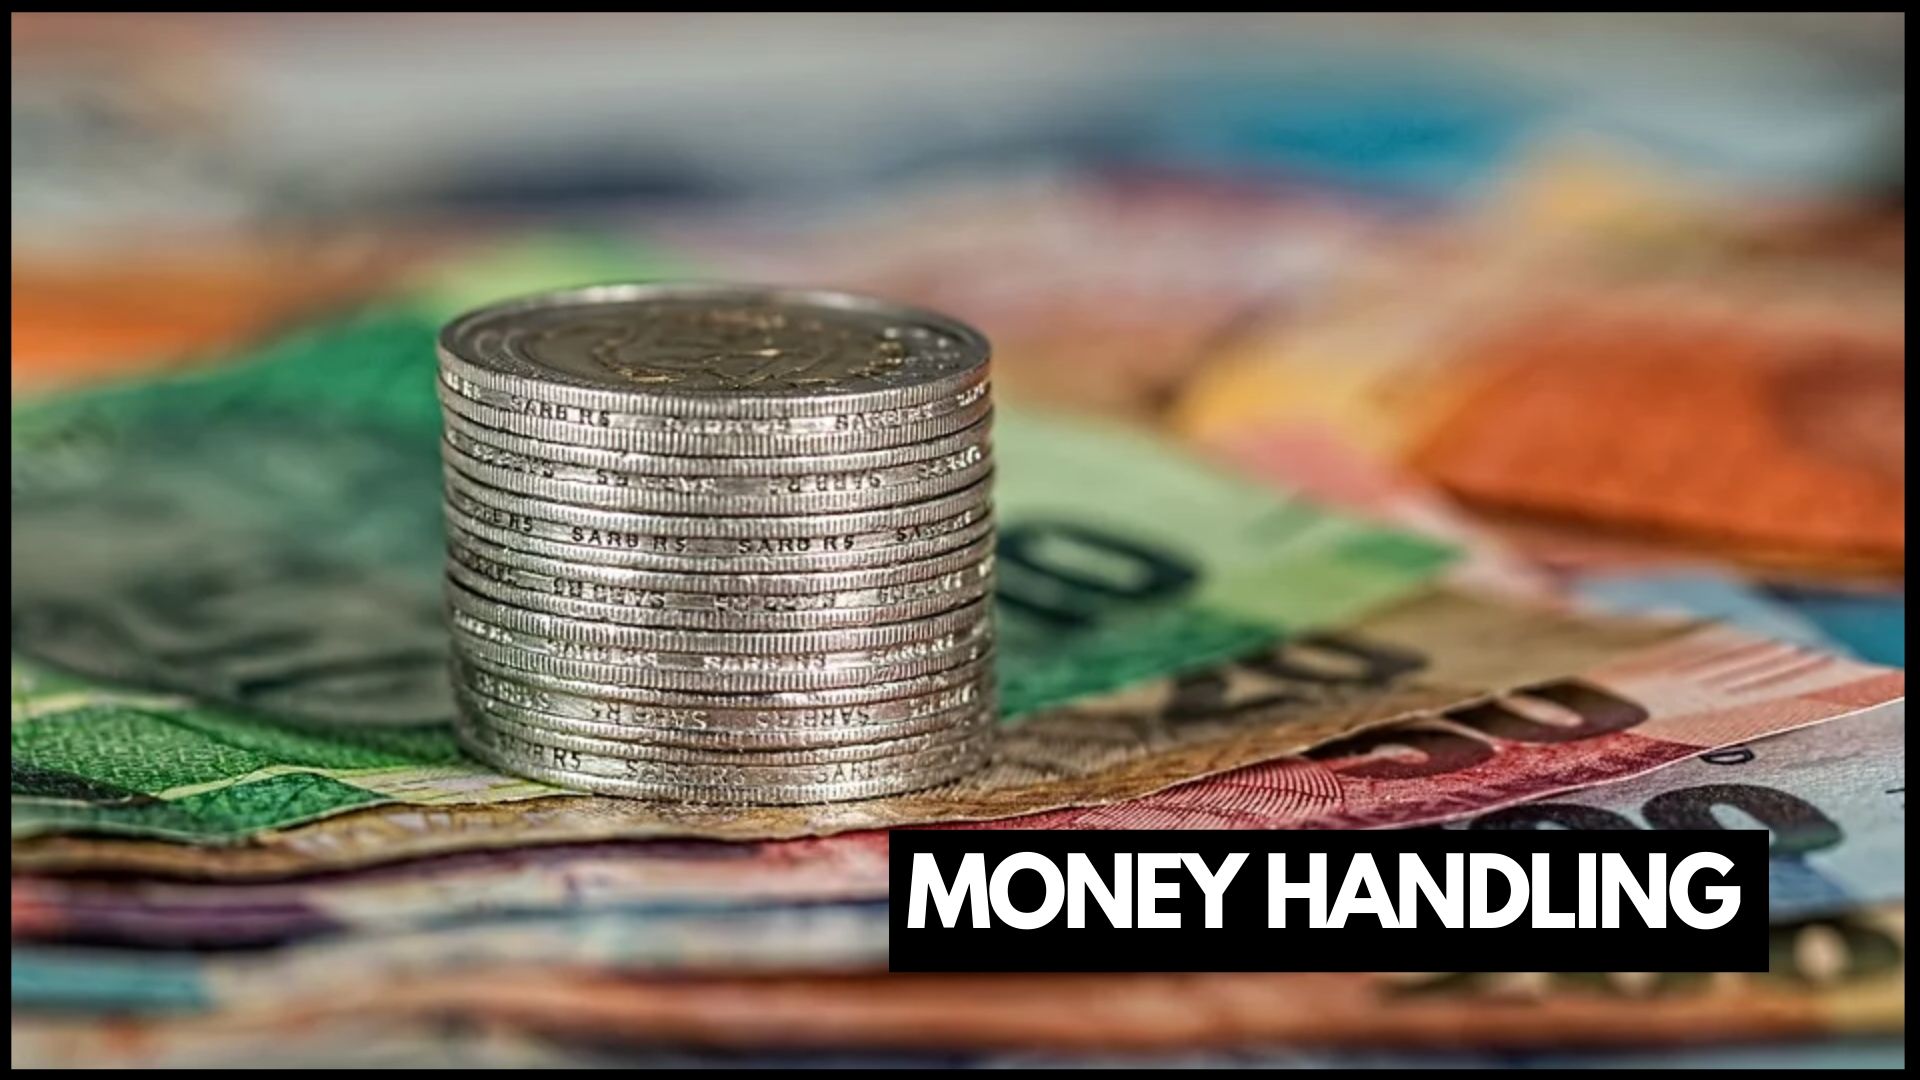 MONEY HANDLING: IMPORTANCE AND BENEFITS